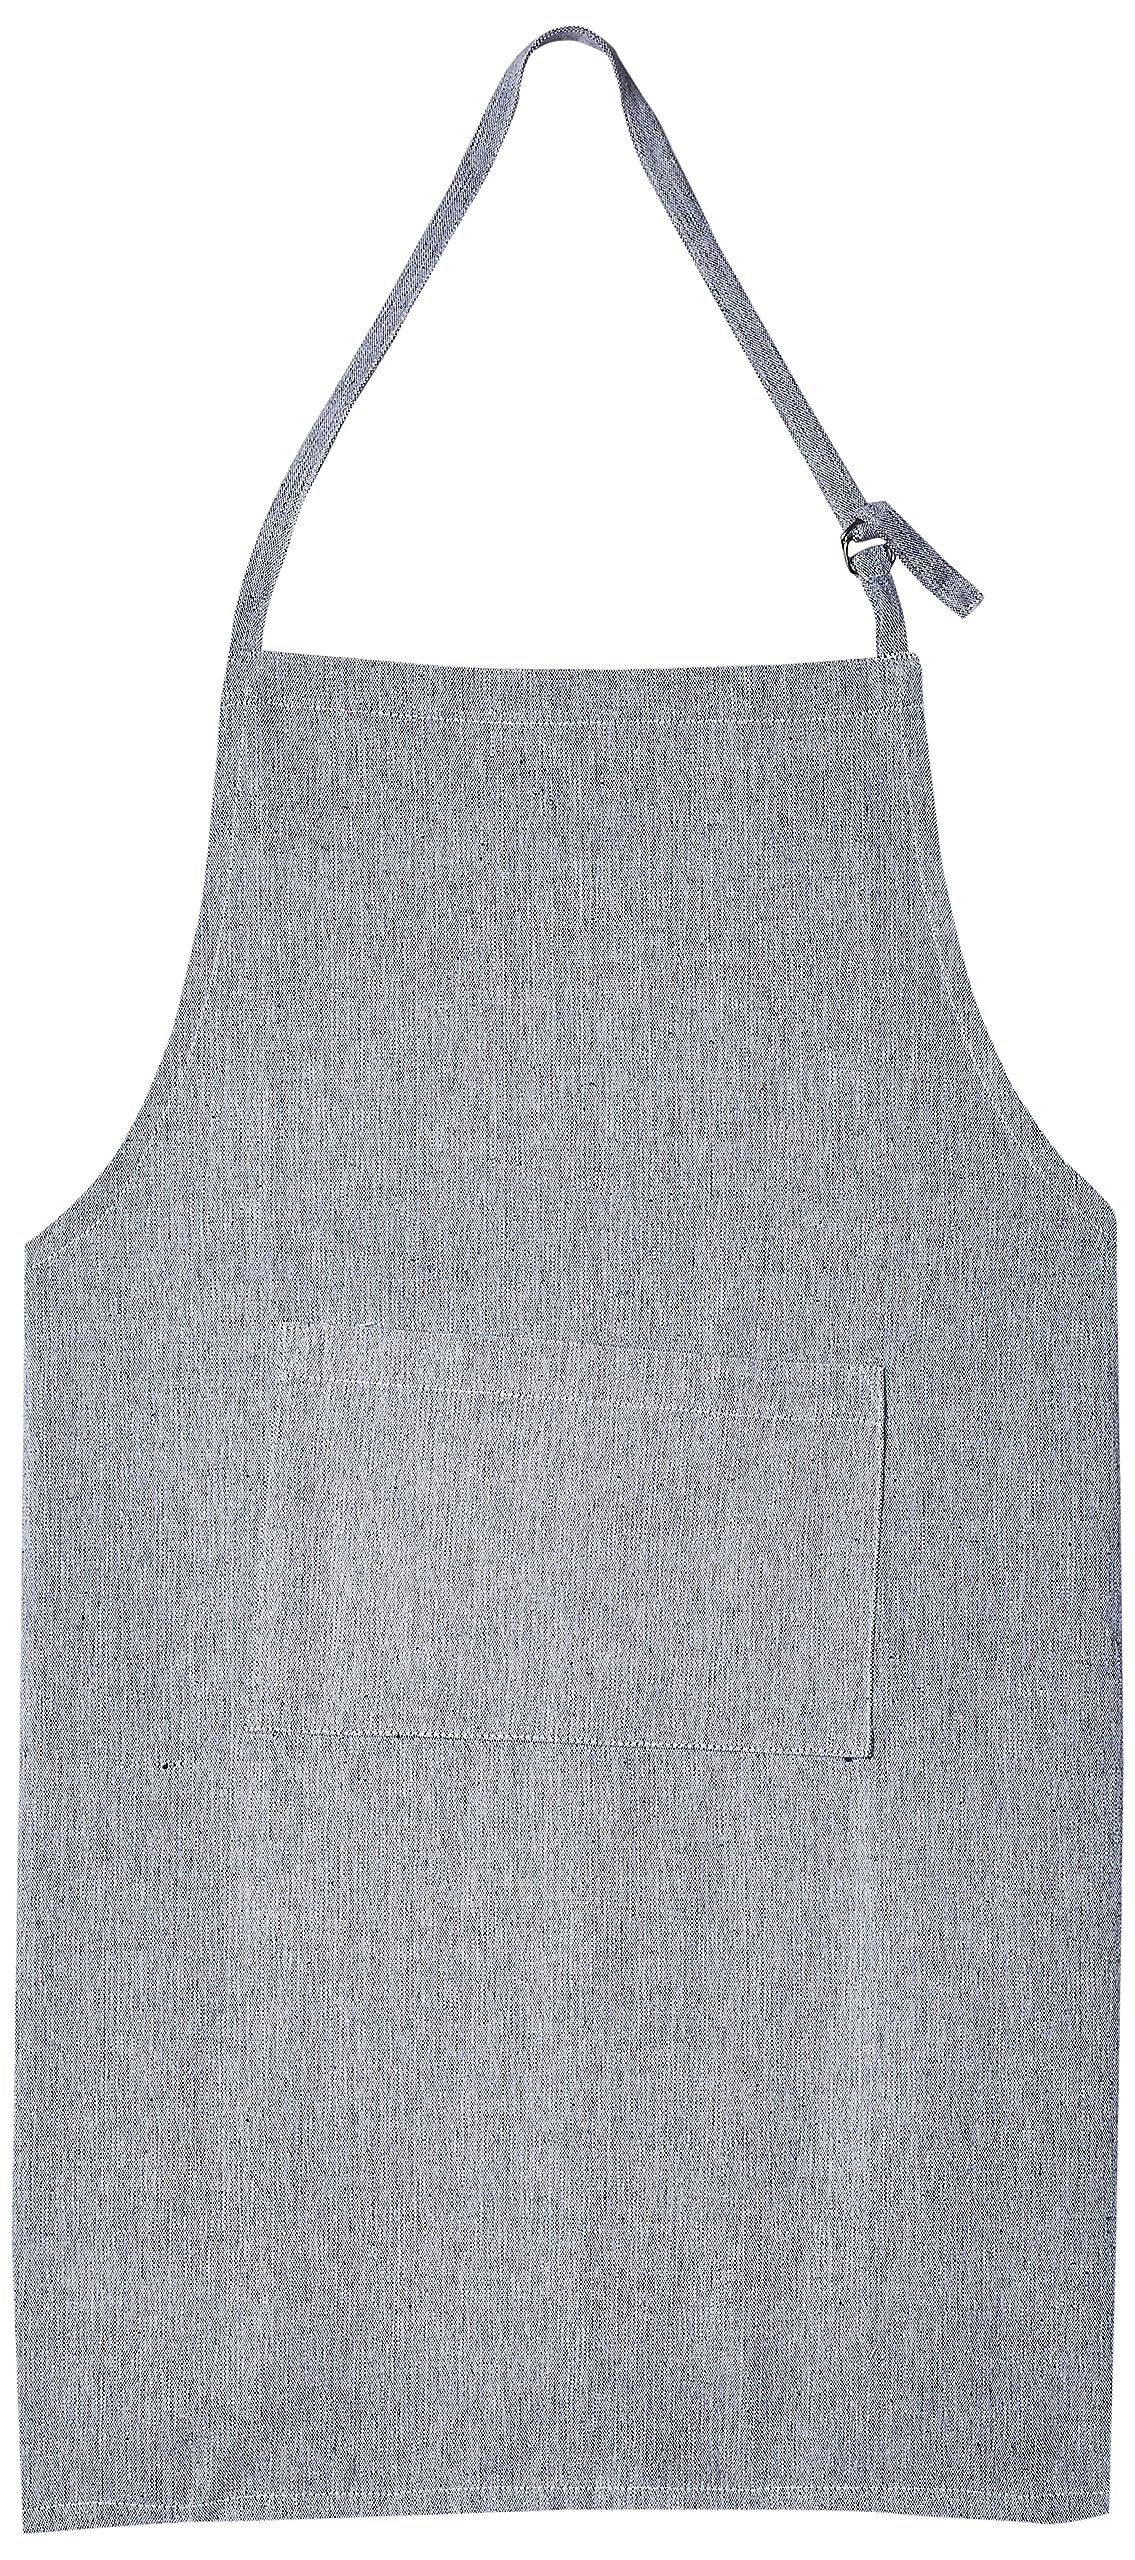 DII 100% Cotton Chef Apron (Blue) $4.70 + Free Shipping w/ Prime or on orders over $35